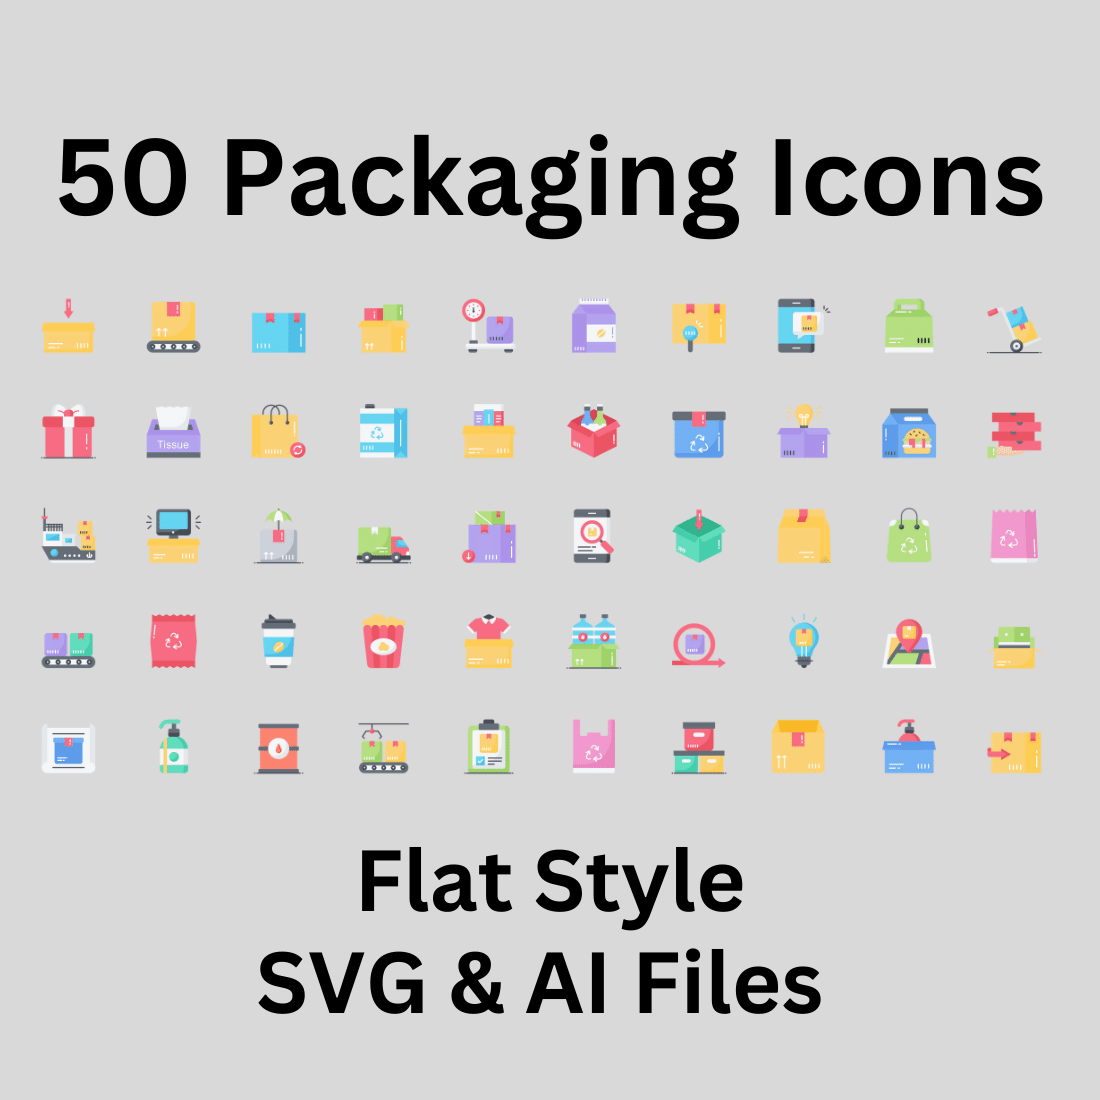 Packaging Icon Set 50 Flat Icons - SVG And AI Files preview image.